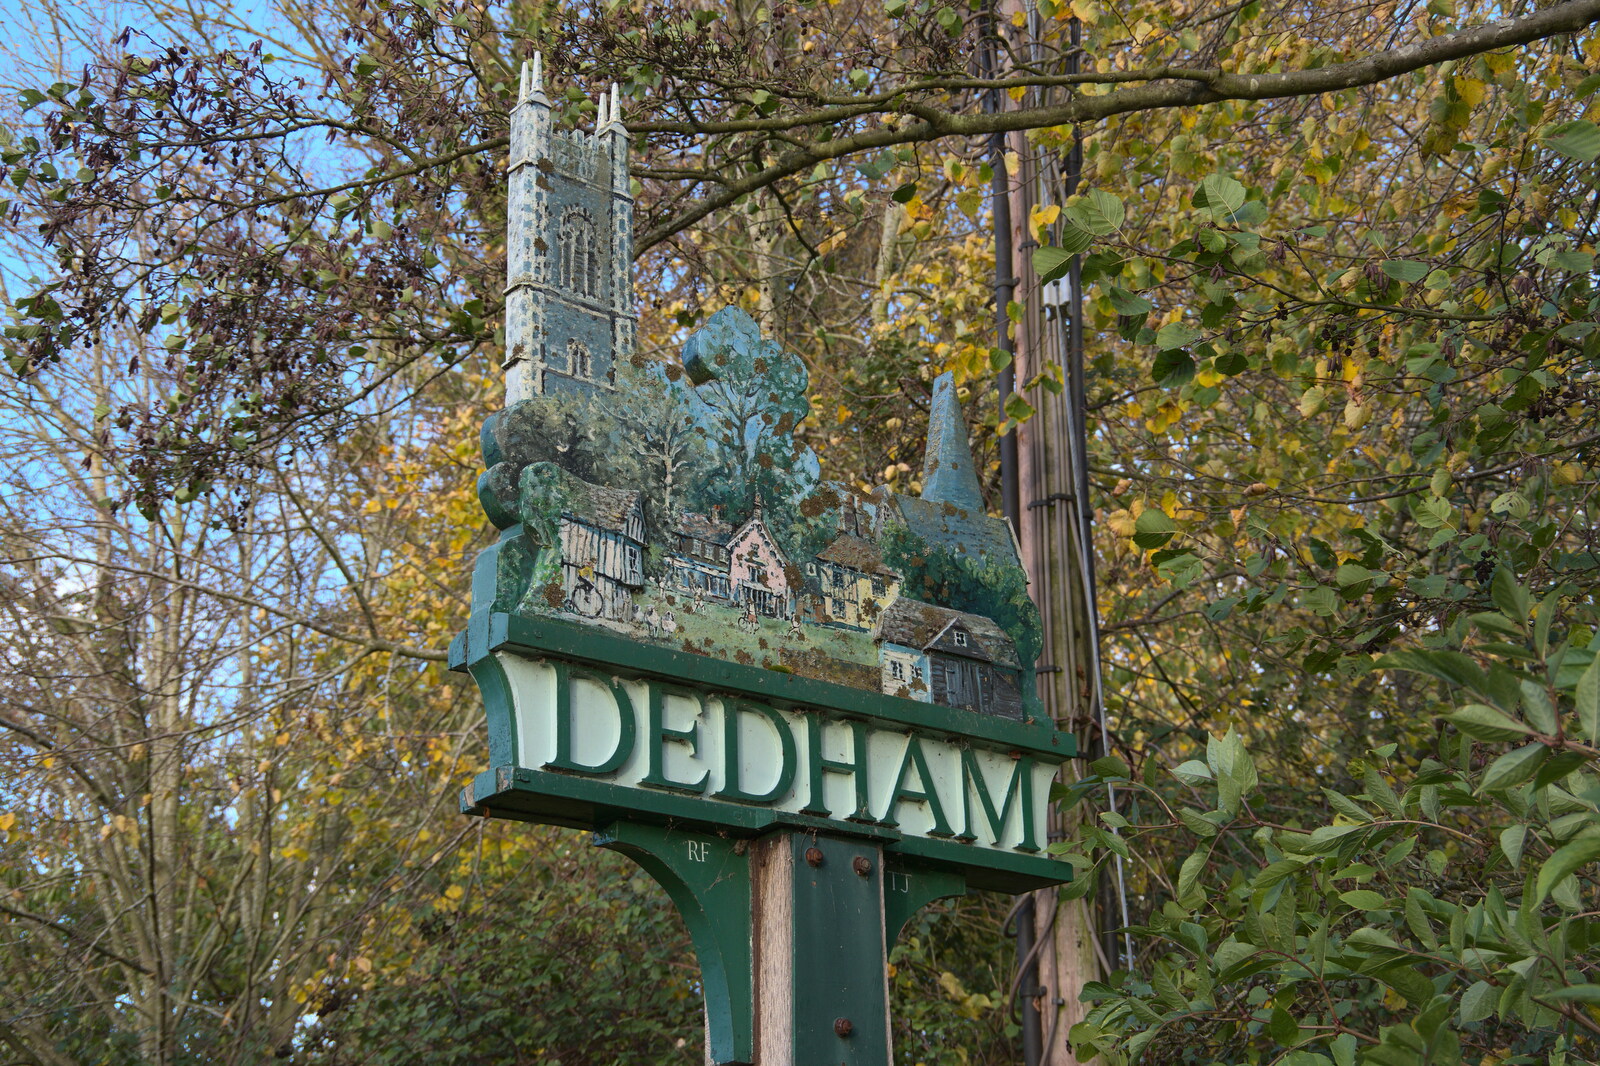 A Postcard from Flatford and Dedham, Suffolk and Essex, 9th November 2022: The Dedham sign, near the car park